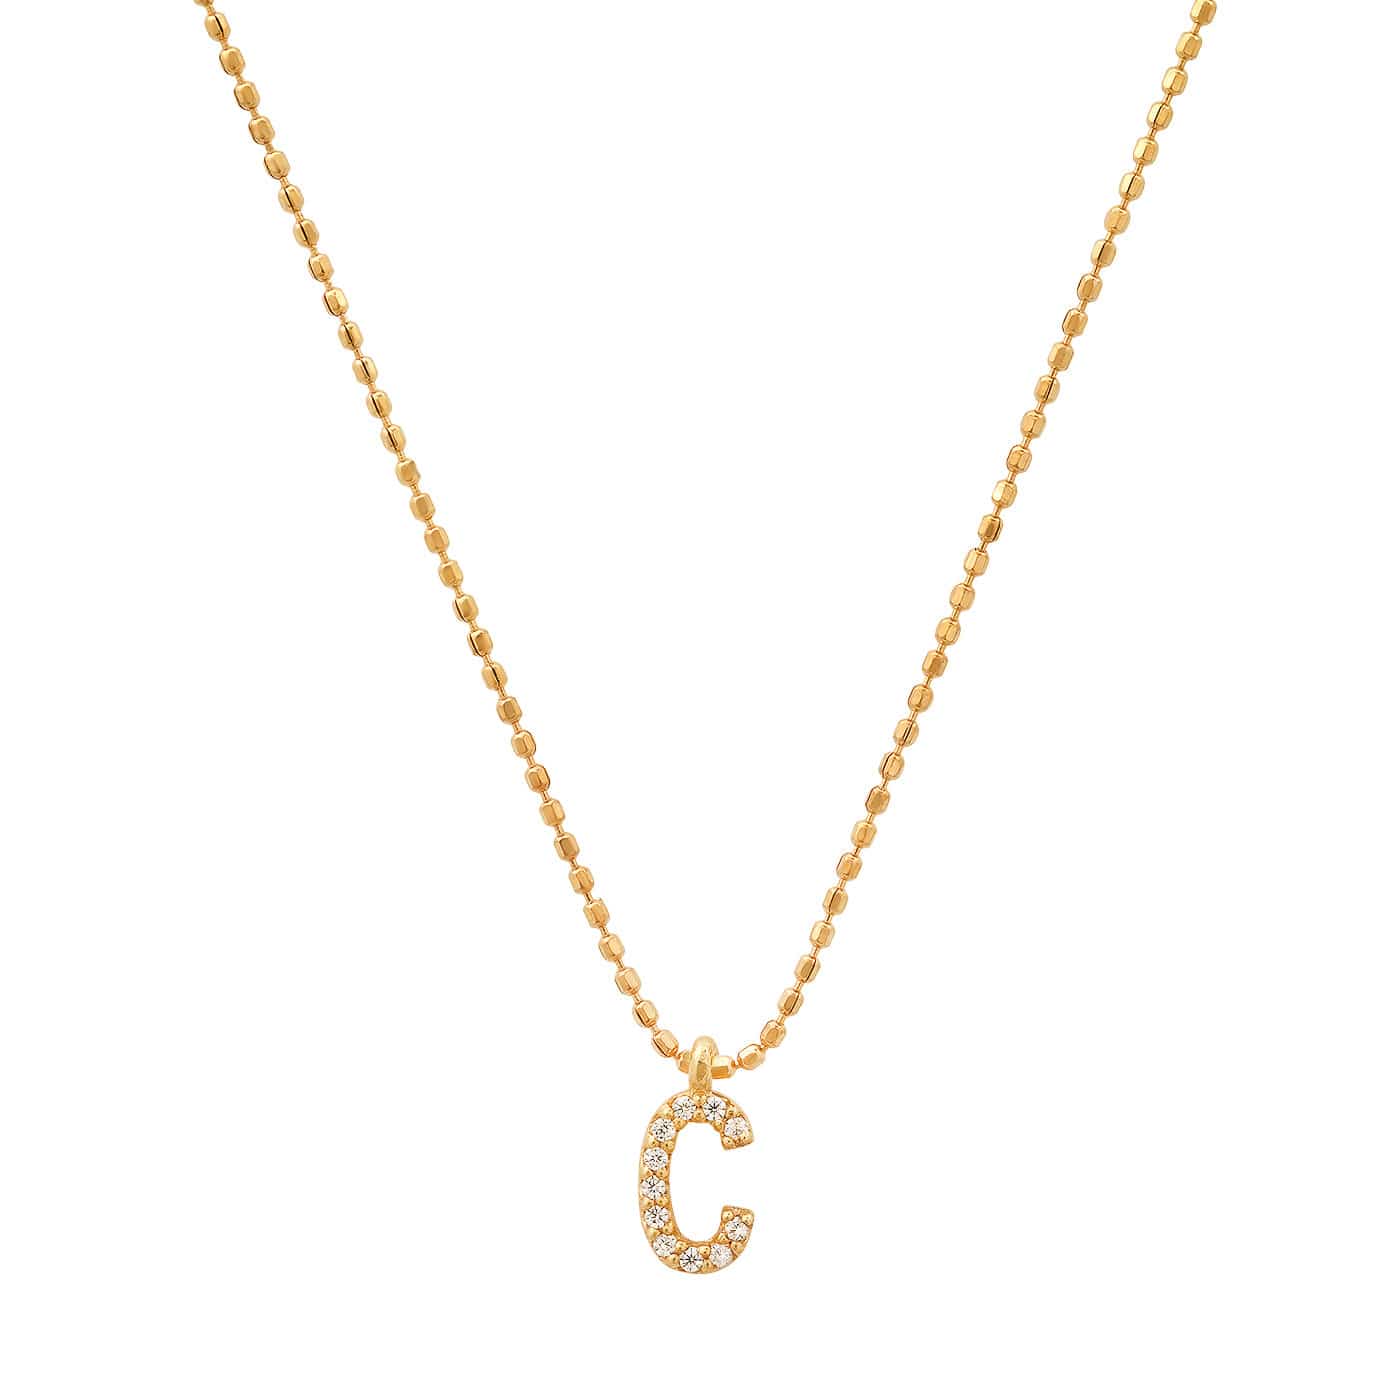 TAI JEWELRY Necklace C Pave Initial Ball Chain Necklace